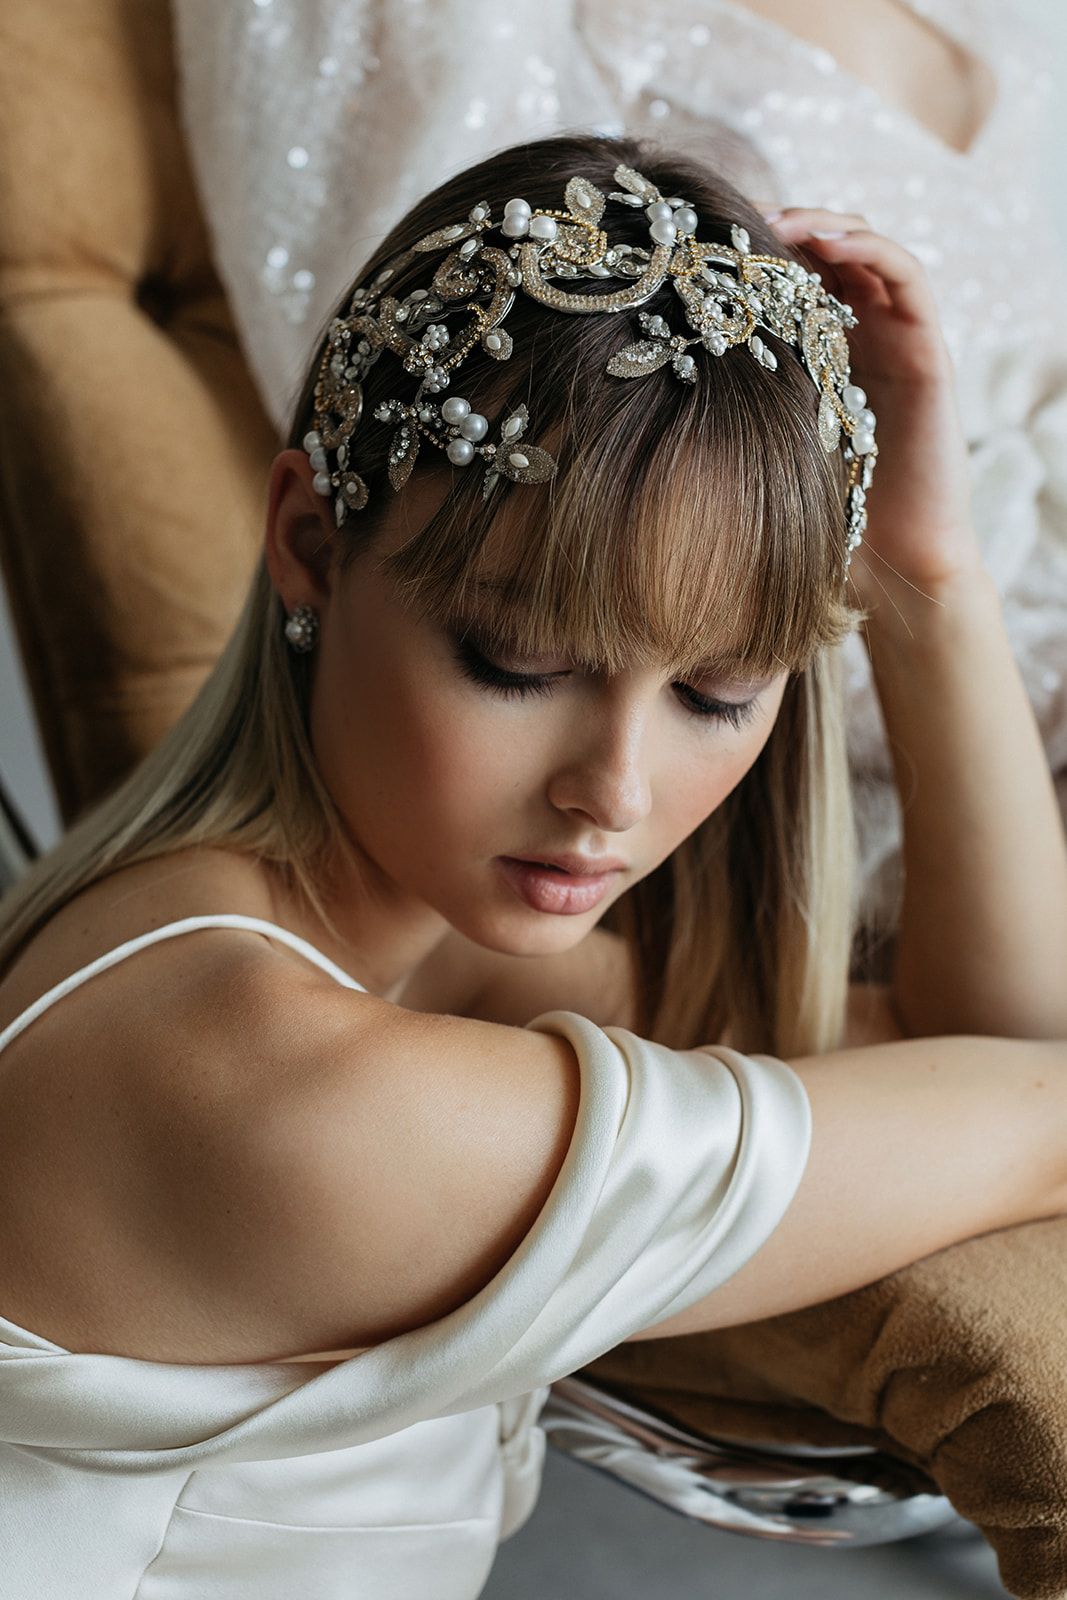 The Best Bridal Headpieces 2023. Alternatives to Traditional Veil. Wedding  Hair Ideas 2023. Statement Bridal Veils 2021. Bridal Hair Accessories 2023.  Wedding Blog. Wedding Hair Accessories 2023.